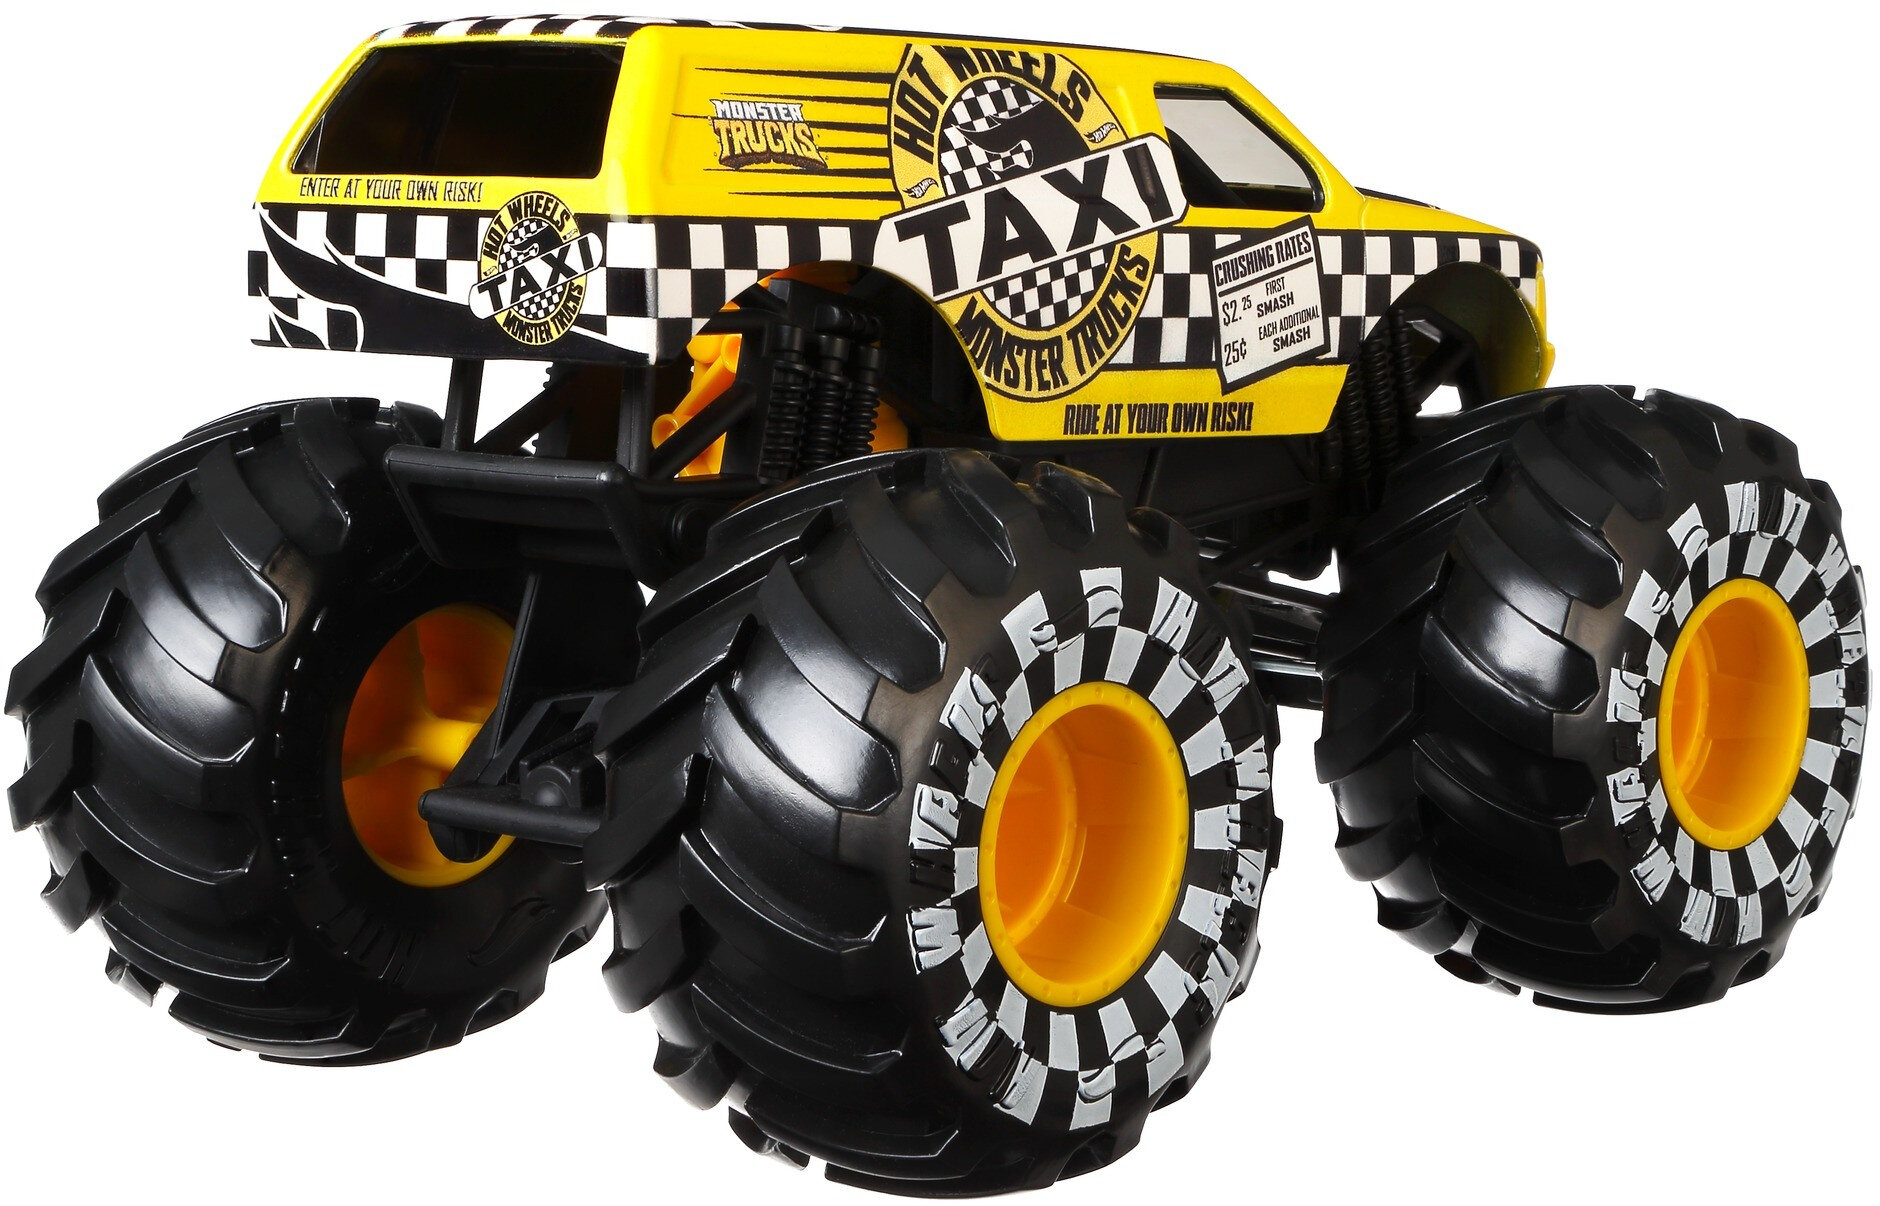 Hot Wheels Monster Trucks Taxi 1:24 Scale Vehicle - image 4 of 5